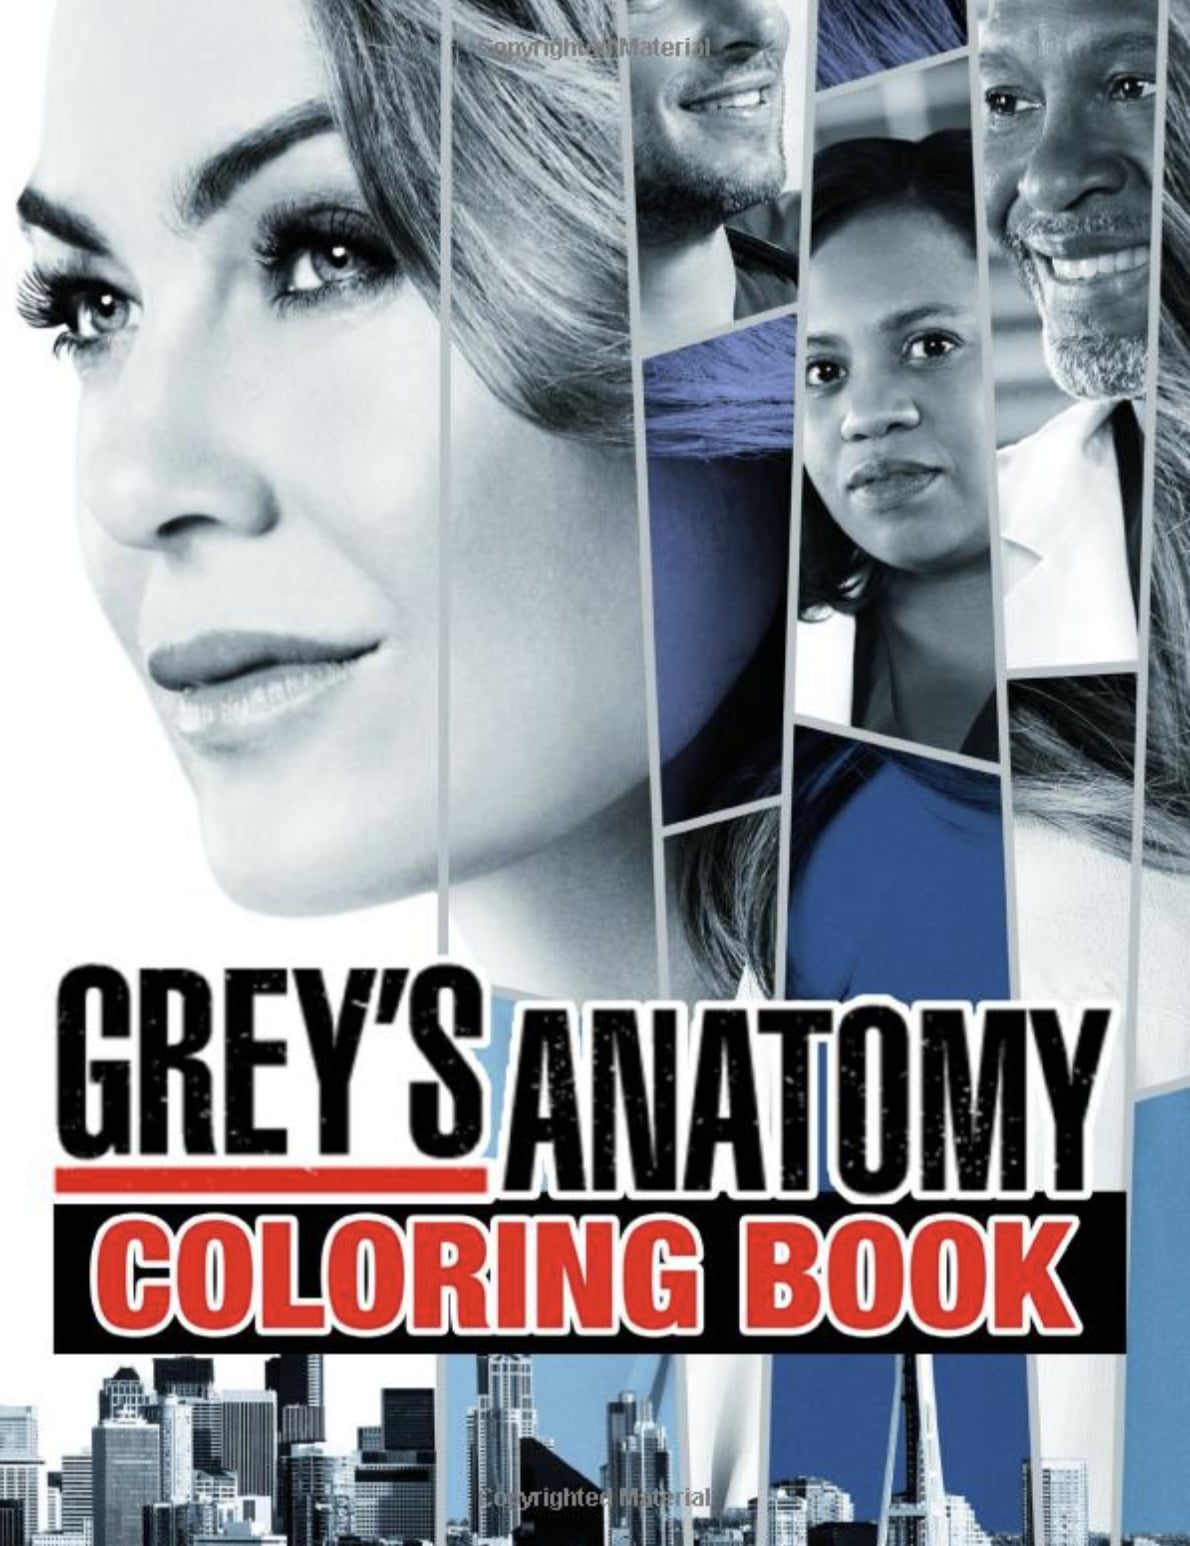 This Grey'S Anatomy Coloring Book Is So Good | Popsugar Smart Living